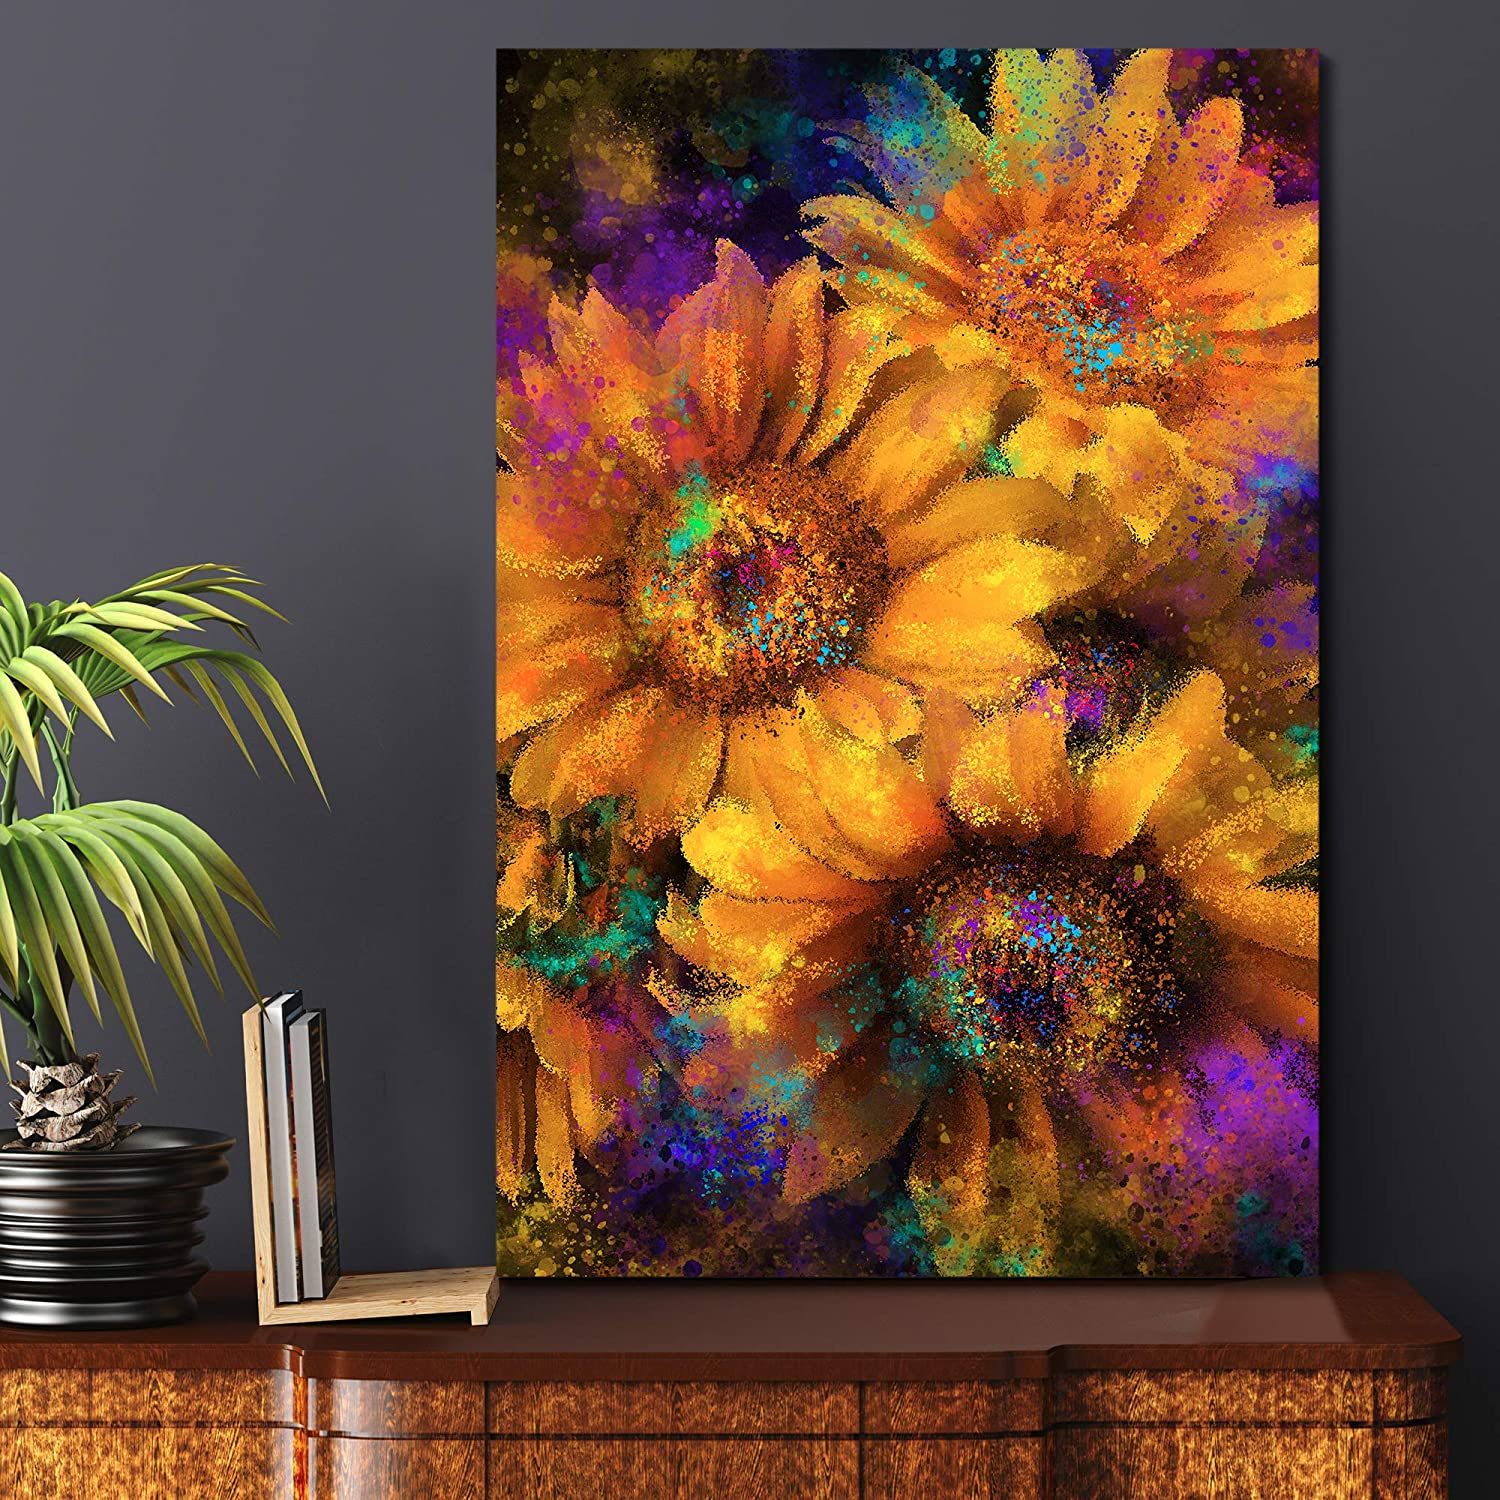 Wall26 Canvas Wall Art Sunflower Painting Wall Decor Stretched And Throughout Sunflower Metal Framed Wall Art (View 4 of 15)